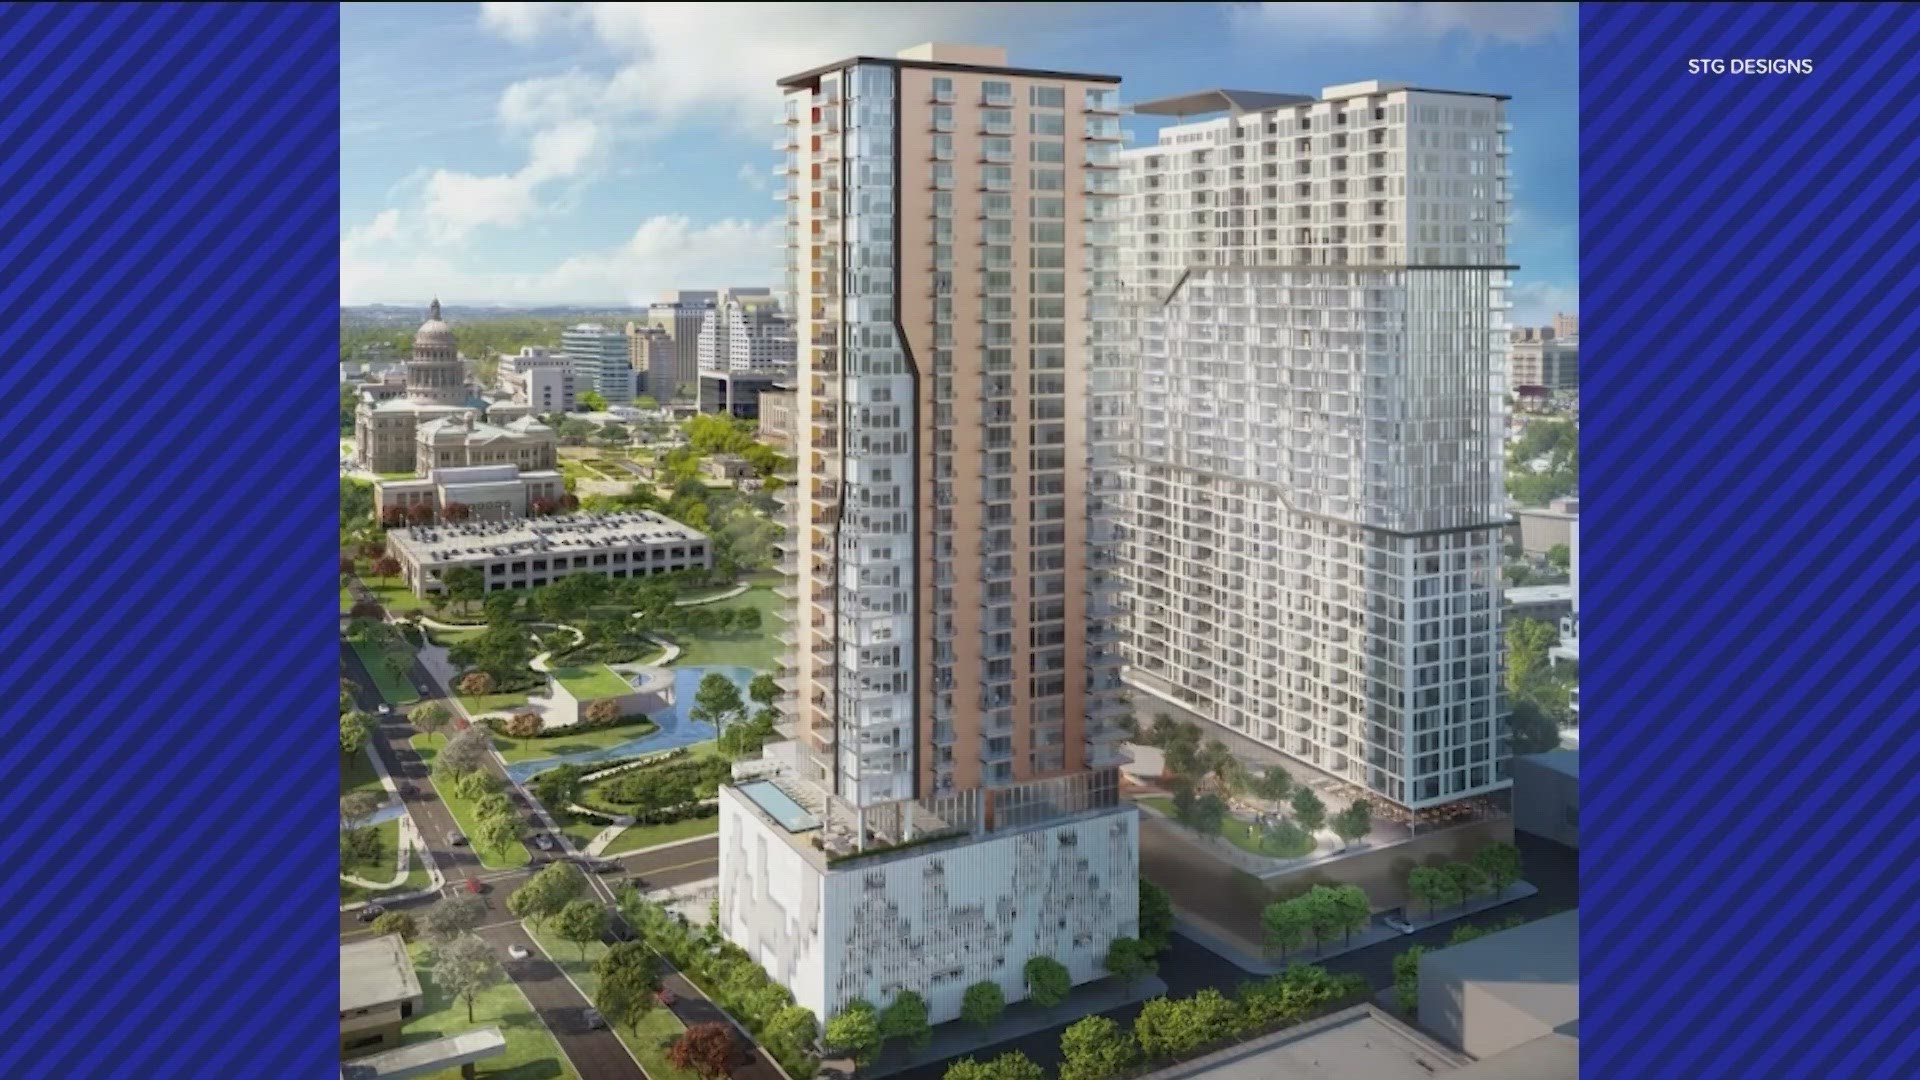 The future of a major affordable housing project in Downtown Austin is uncertain. The HealthSouth property deal was recently killed.